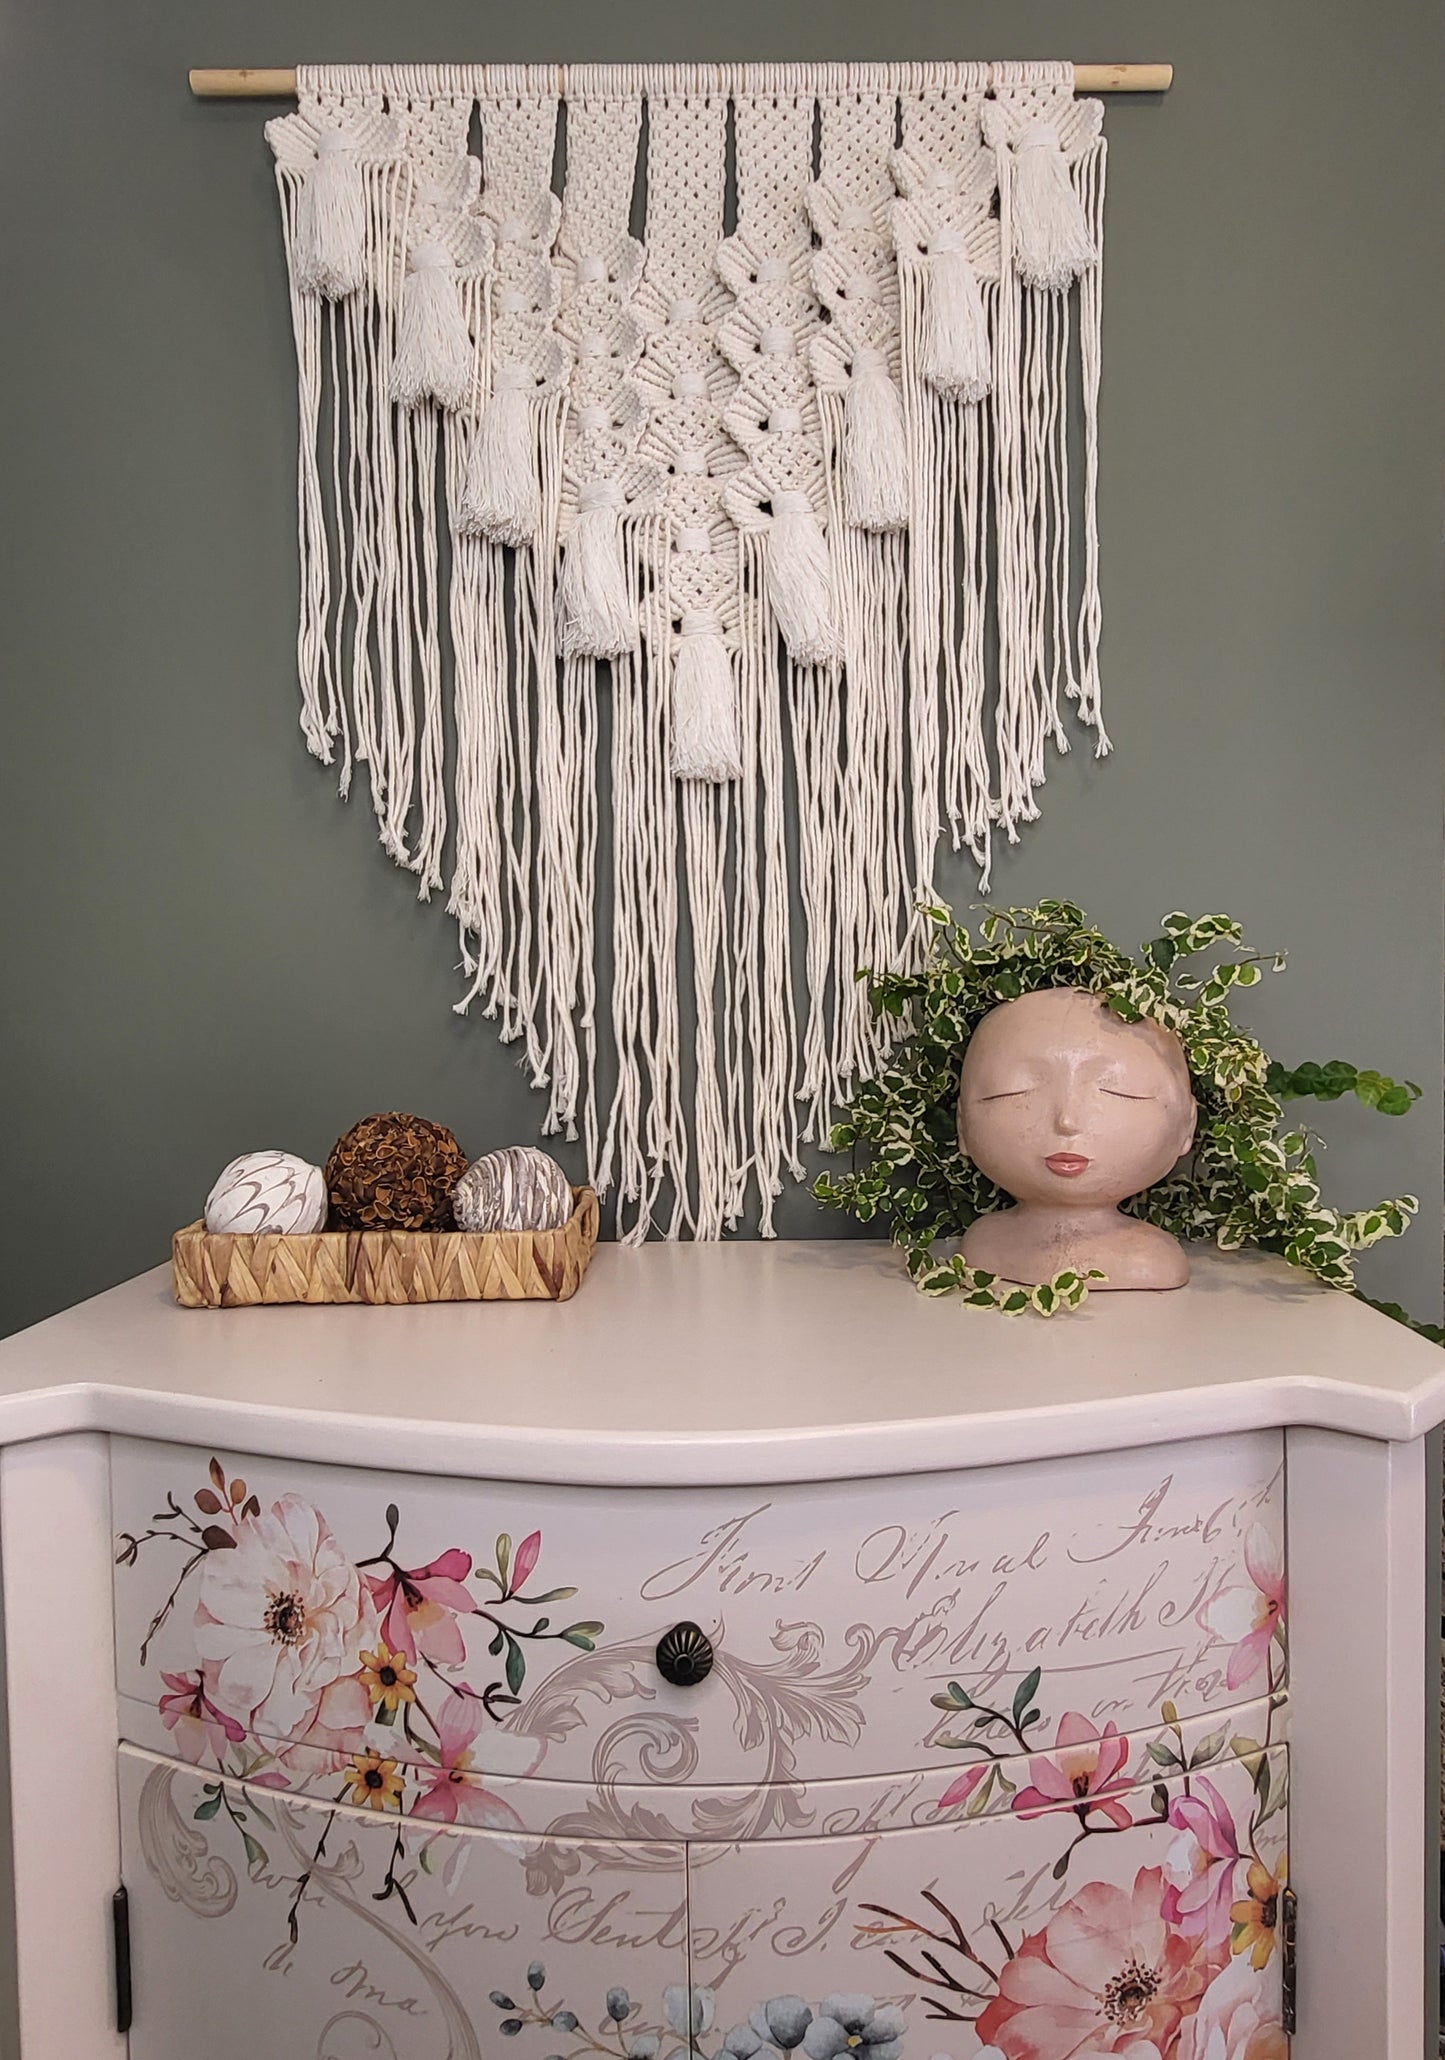 Handmade by HILARY  -  Happy Trails  -  Macramé Wall Hanging - Made in USA